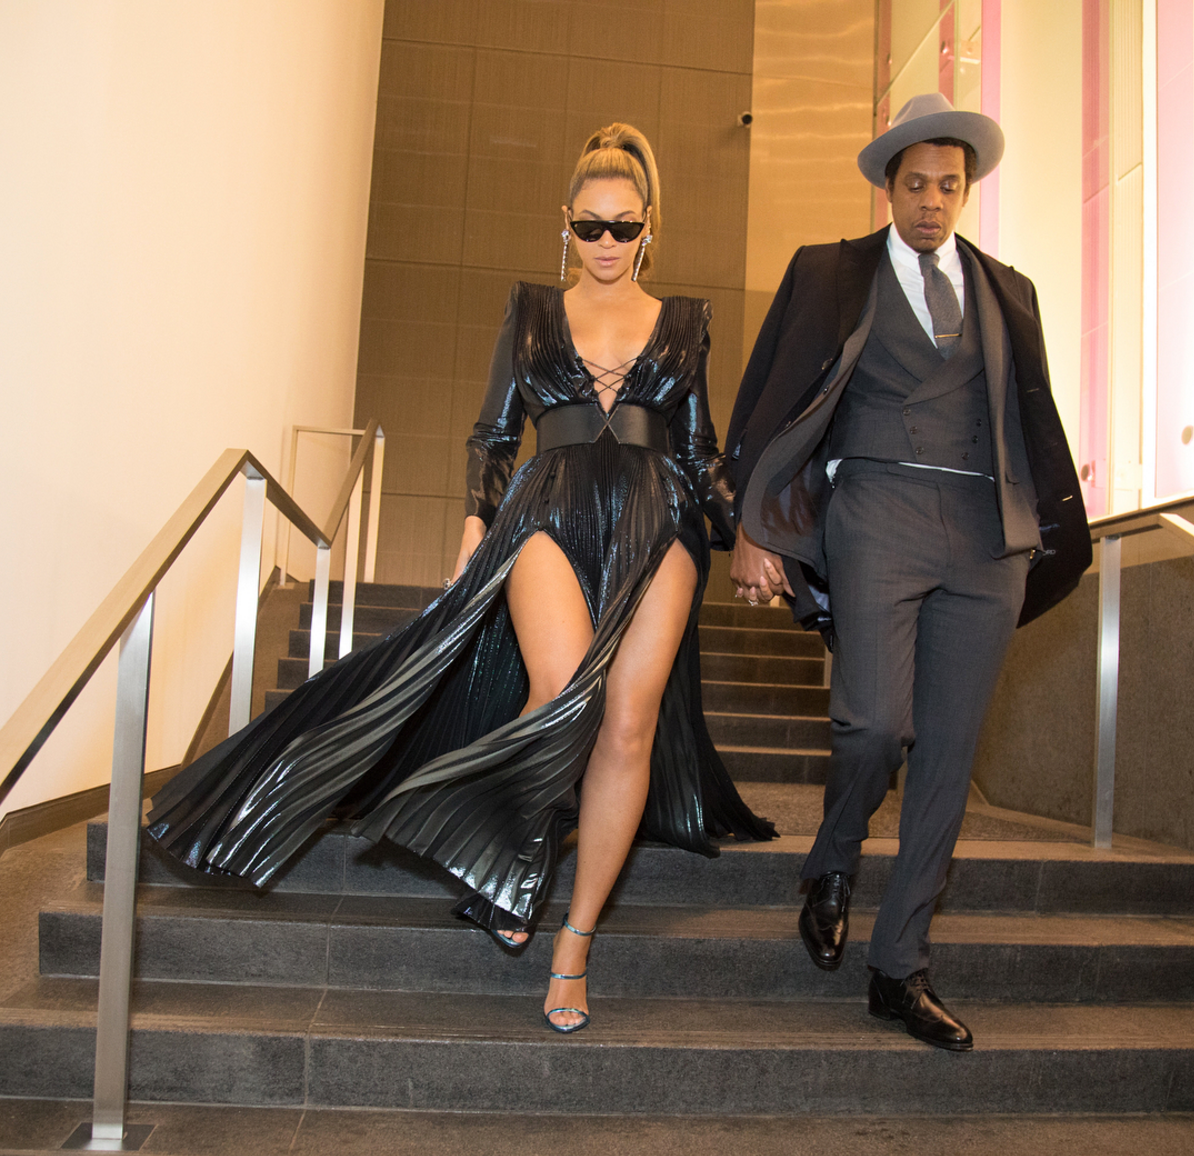 Name A Couple Hotter Than Beyonce and Jay-Z Over Grammys Weekend....We'll Wait!
